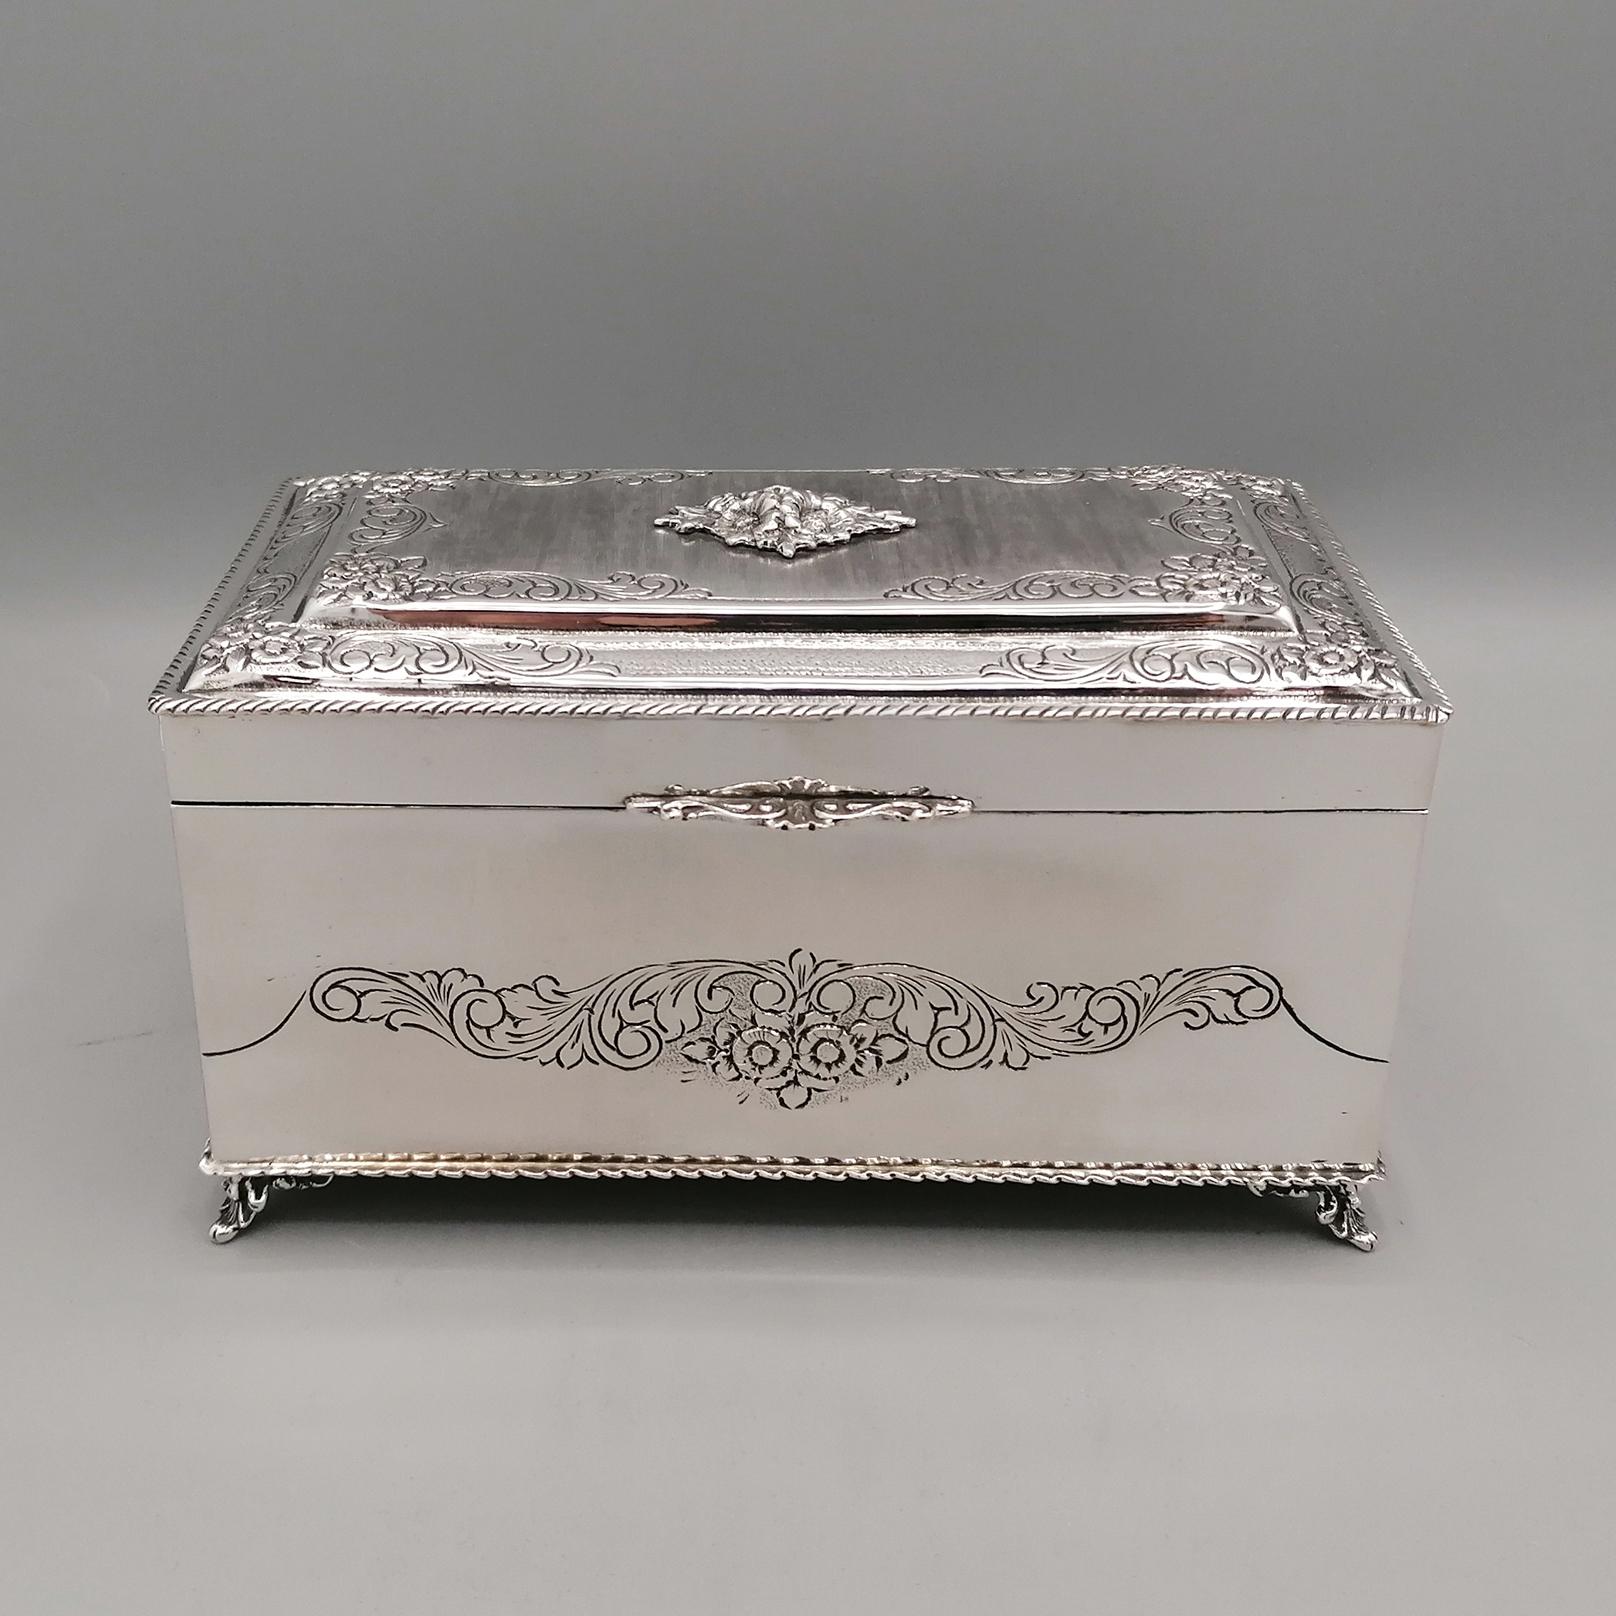 Solid silver jewelry box.
This box was made completely by hand, rectangular parallelepiped.
To detach it and elevate it from the support surface, 4 small feet made with the casting technique were welded.
The classic baroque scrolls have been